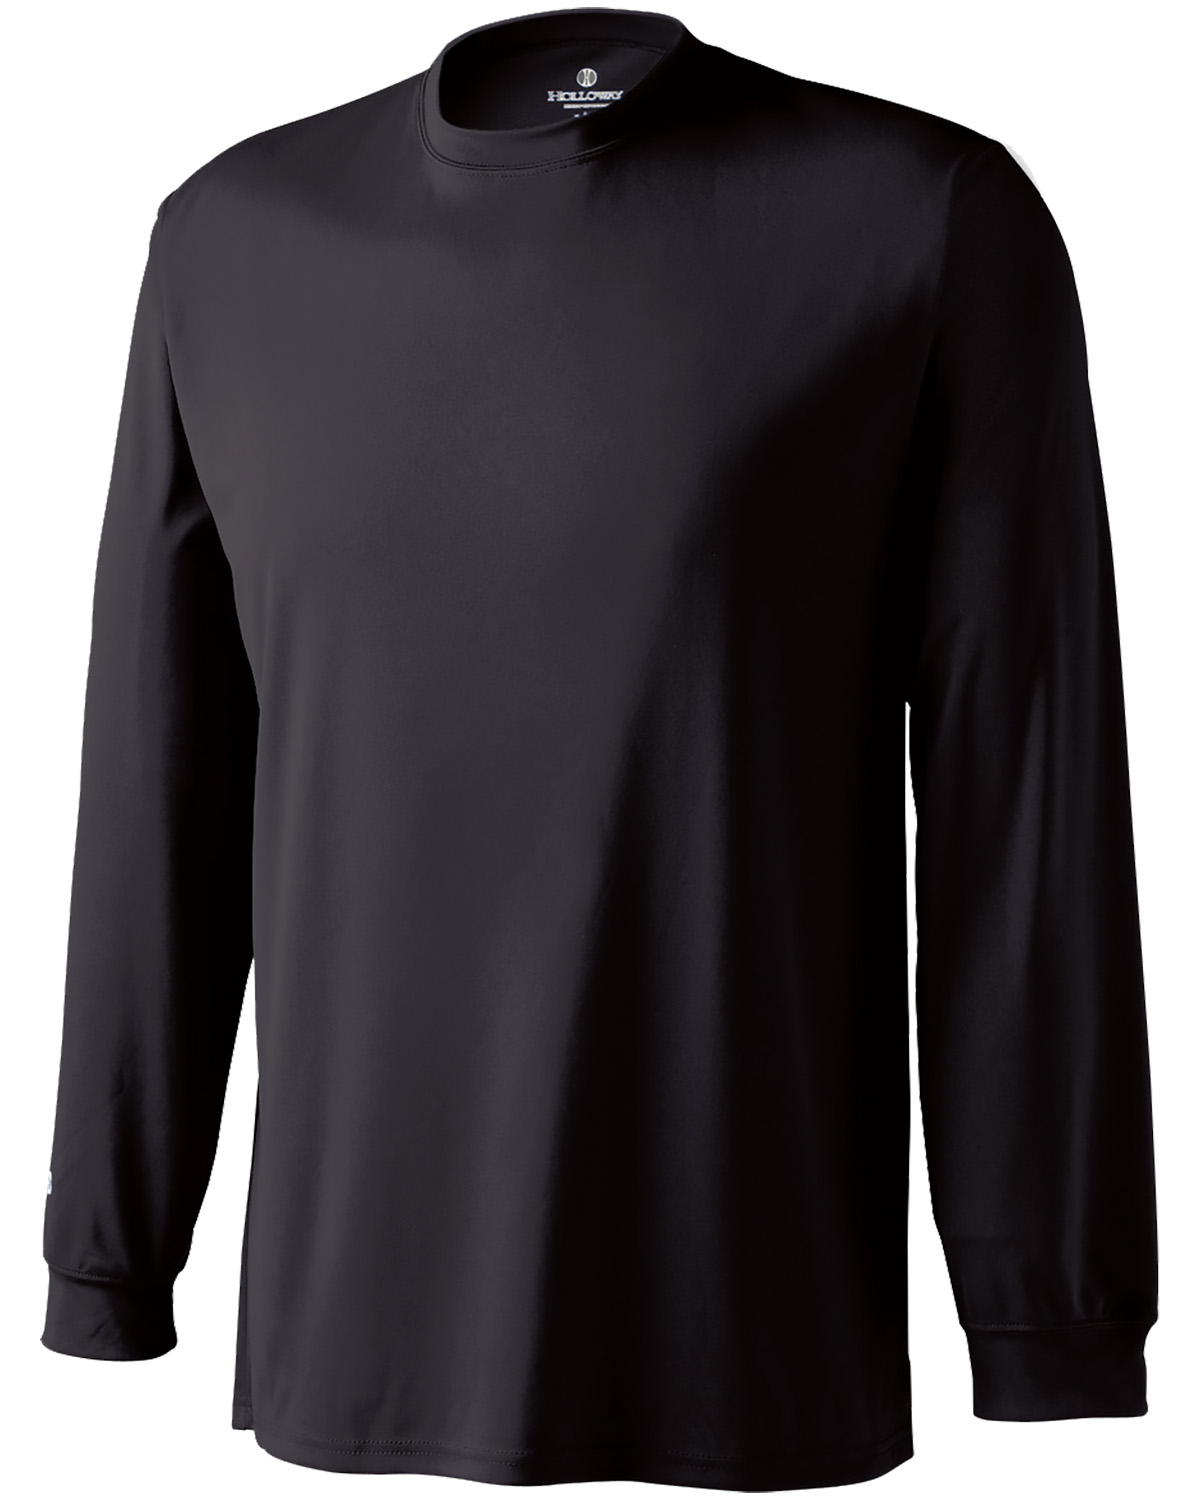 Holloway 222621 - Youth Polyester Long Sleeve Spark 2.0 Shirt